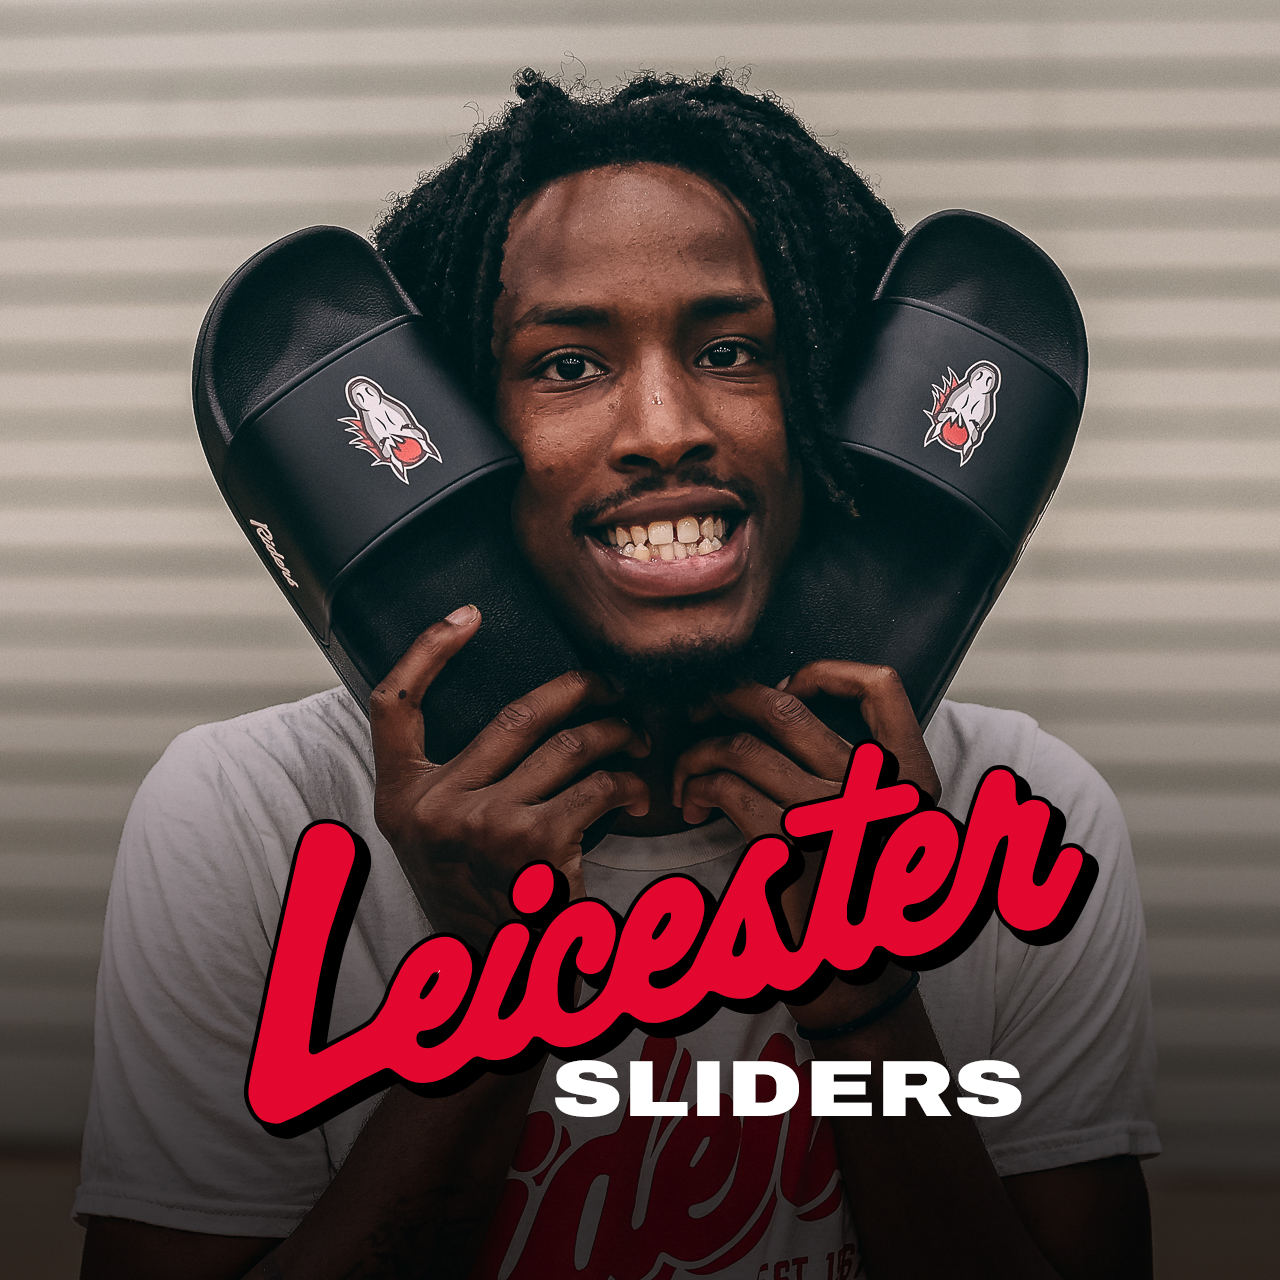 Leicester Sliders